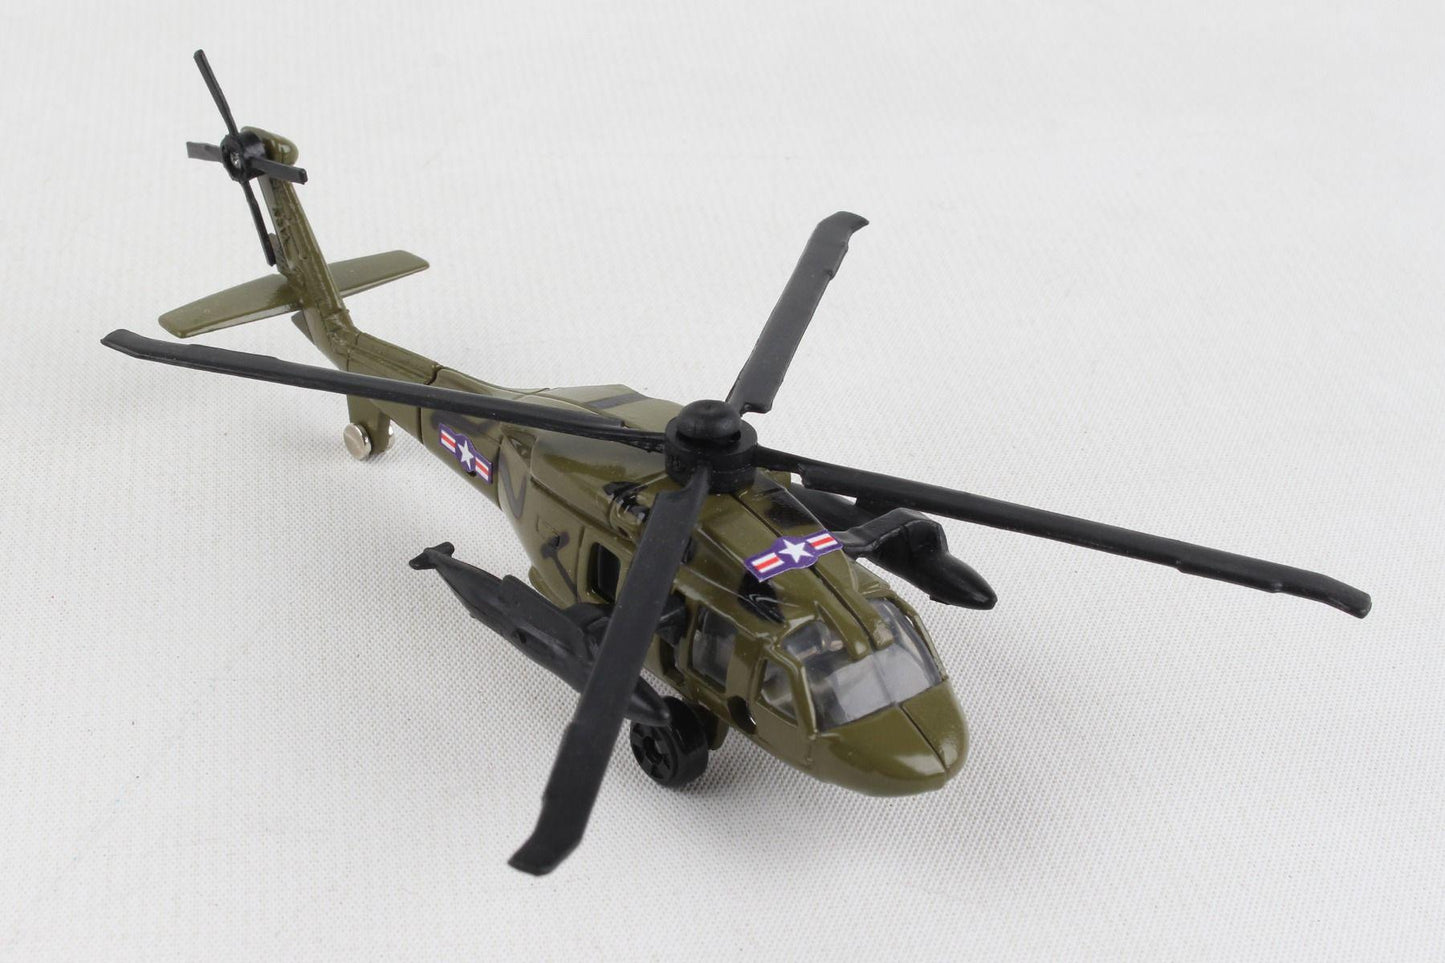 Runway24 Hawk Helicopter, Die-cast Metal Toy - Create your own runway with connected pieces and accessories